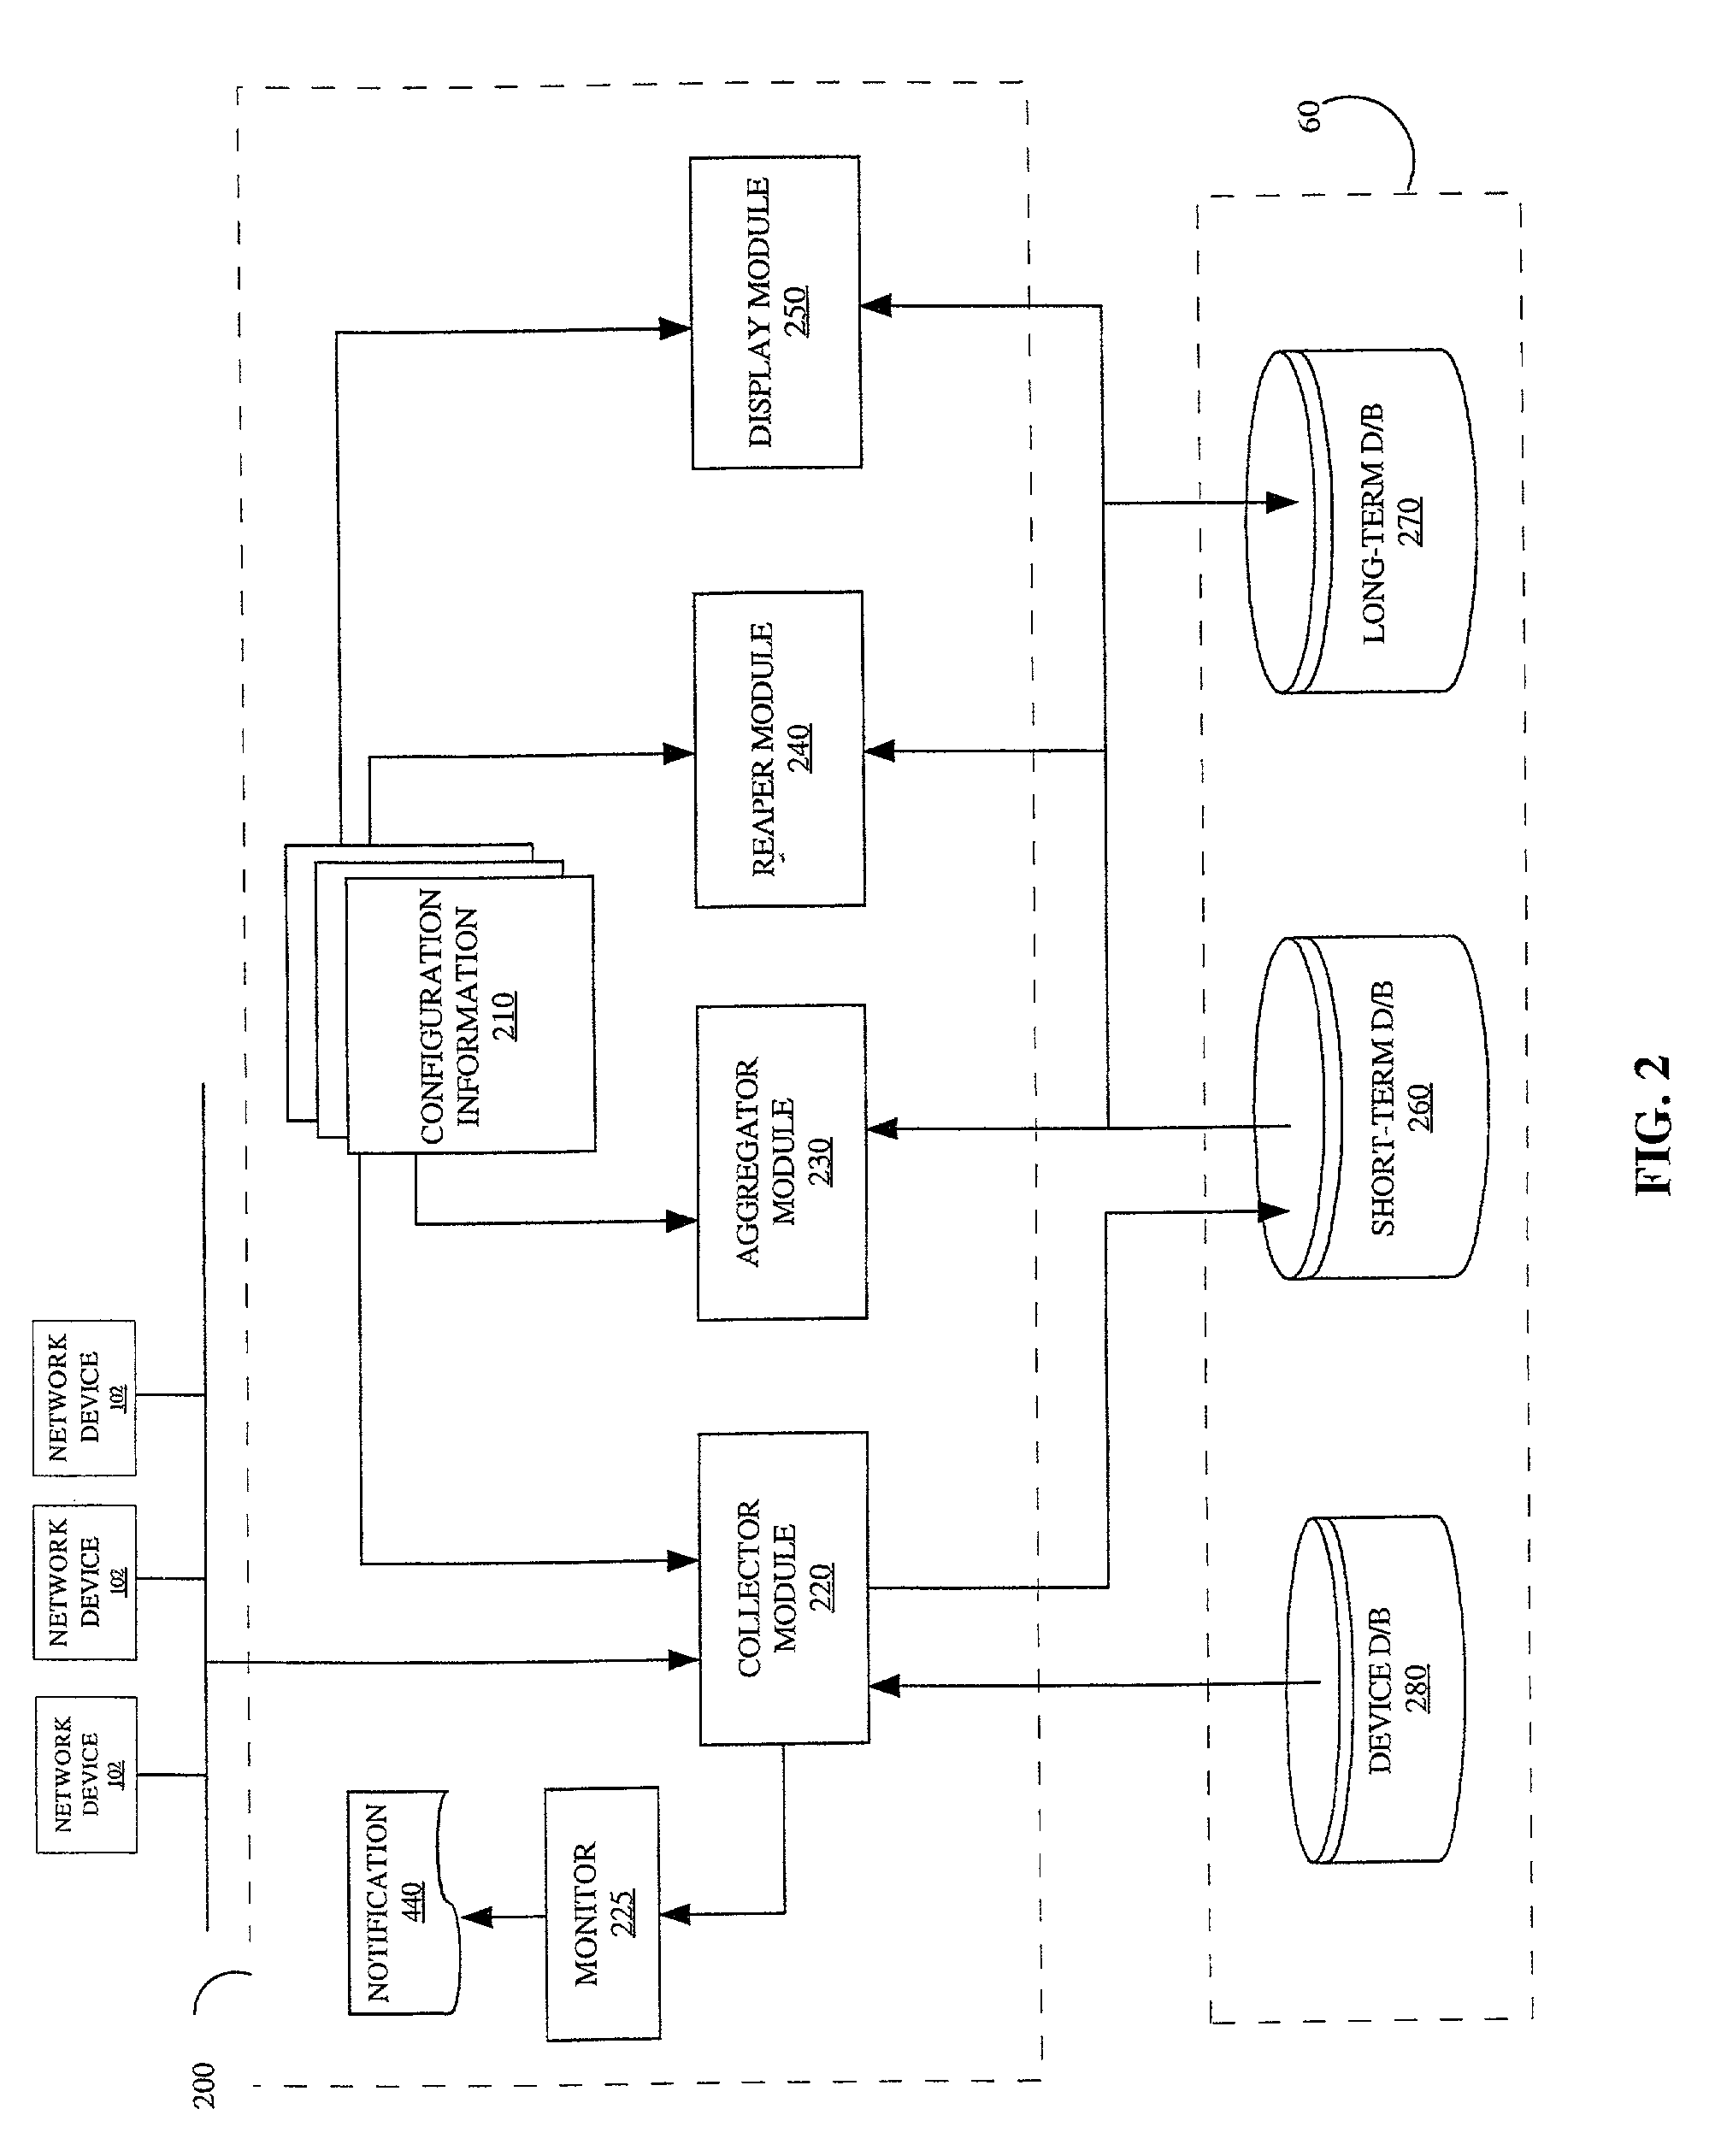 Method and apparatus for collecting, aggregating and monitoring network management information